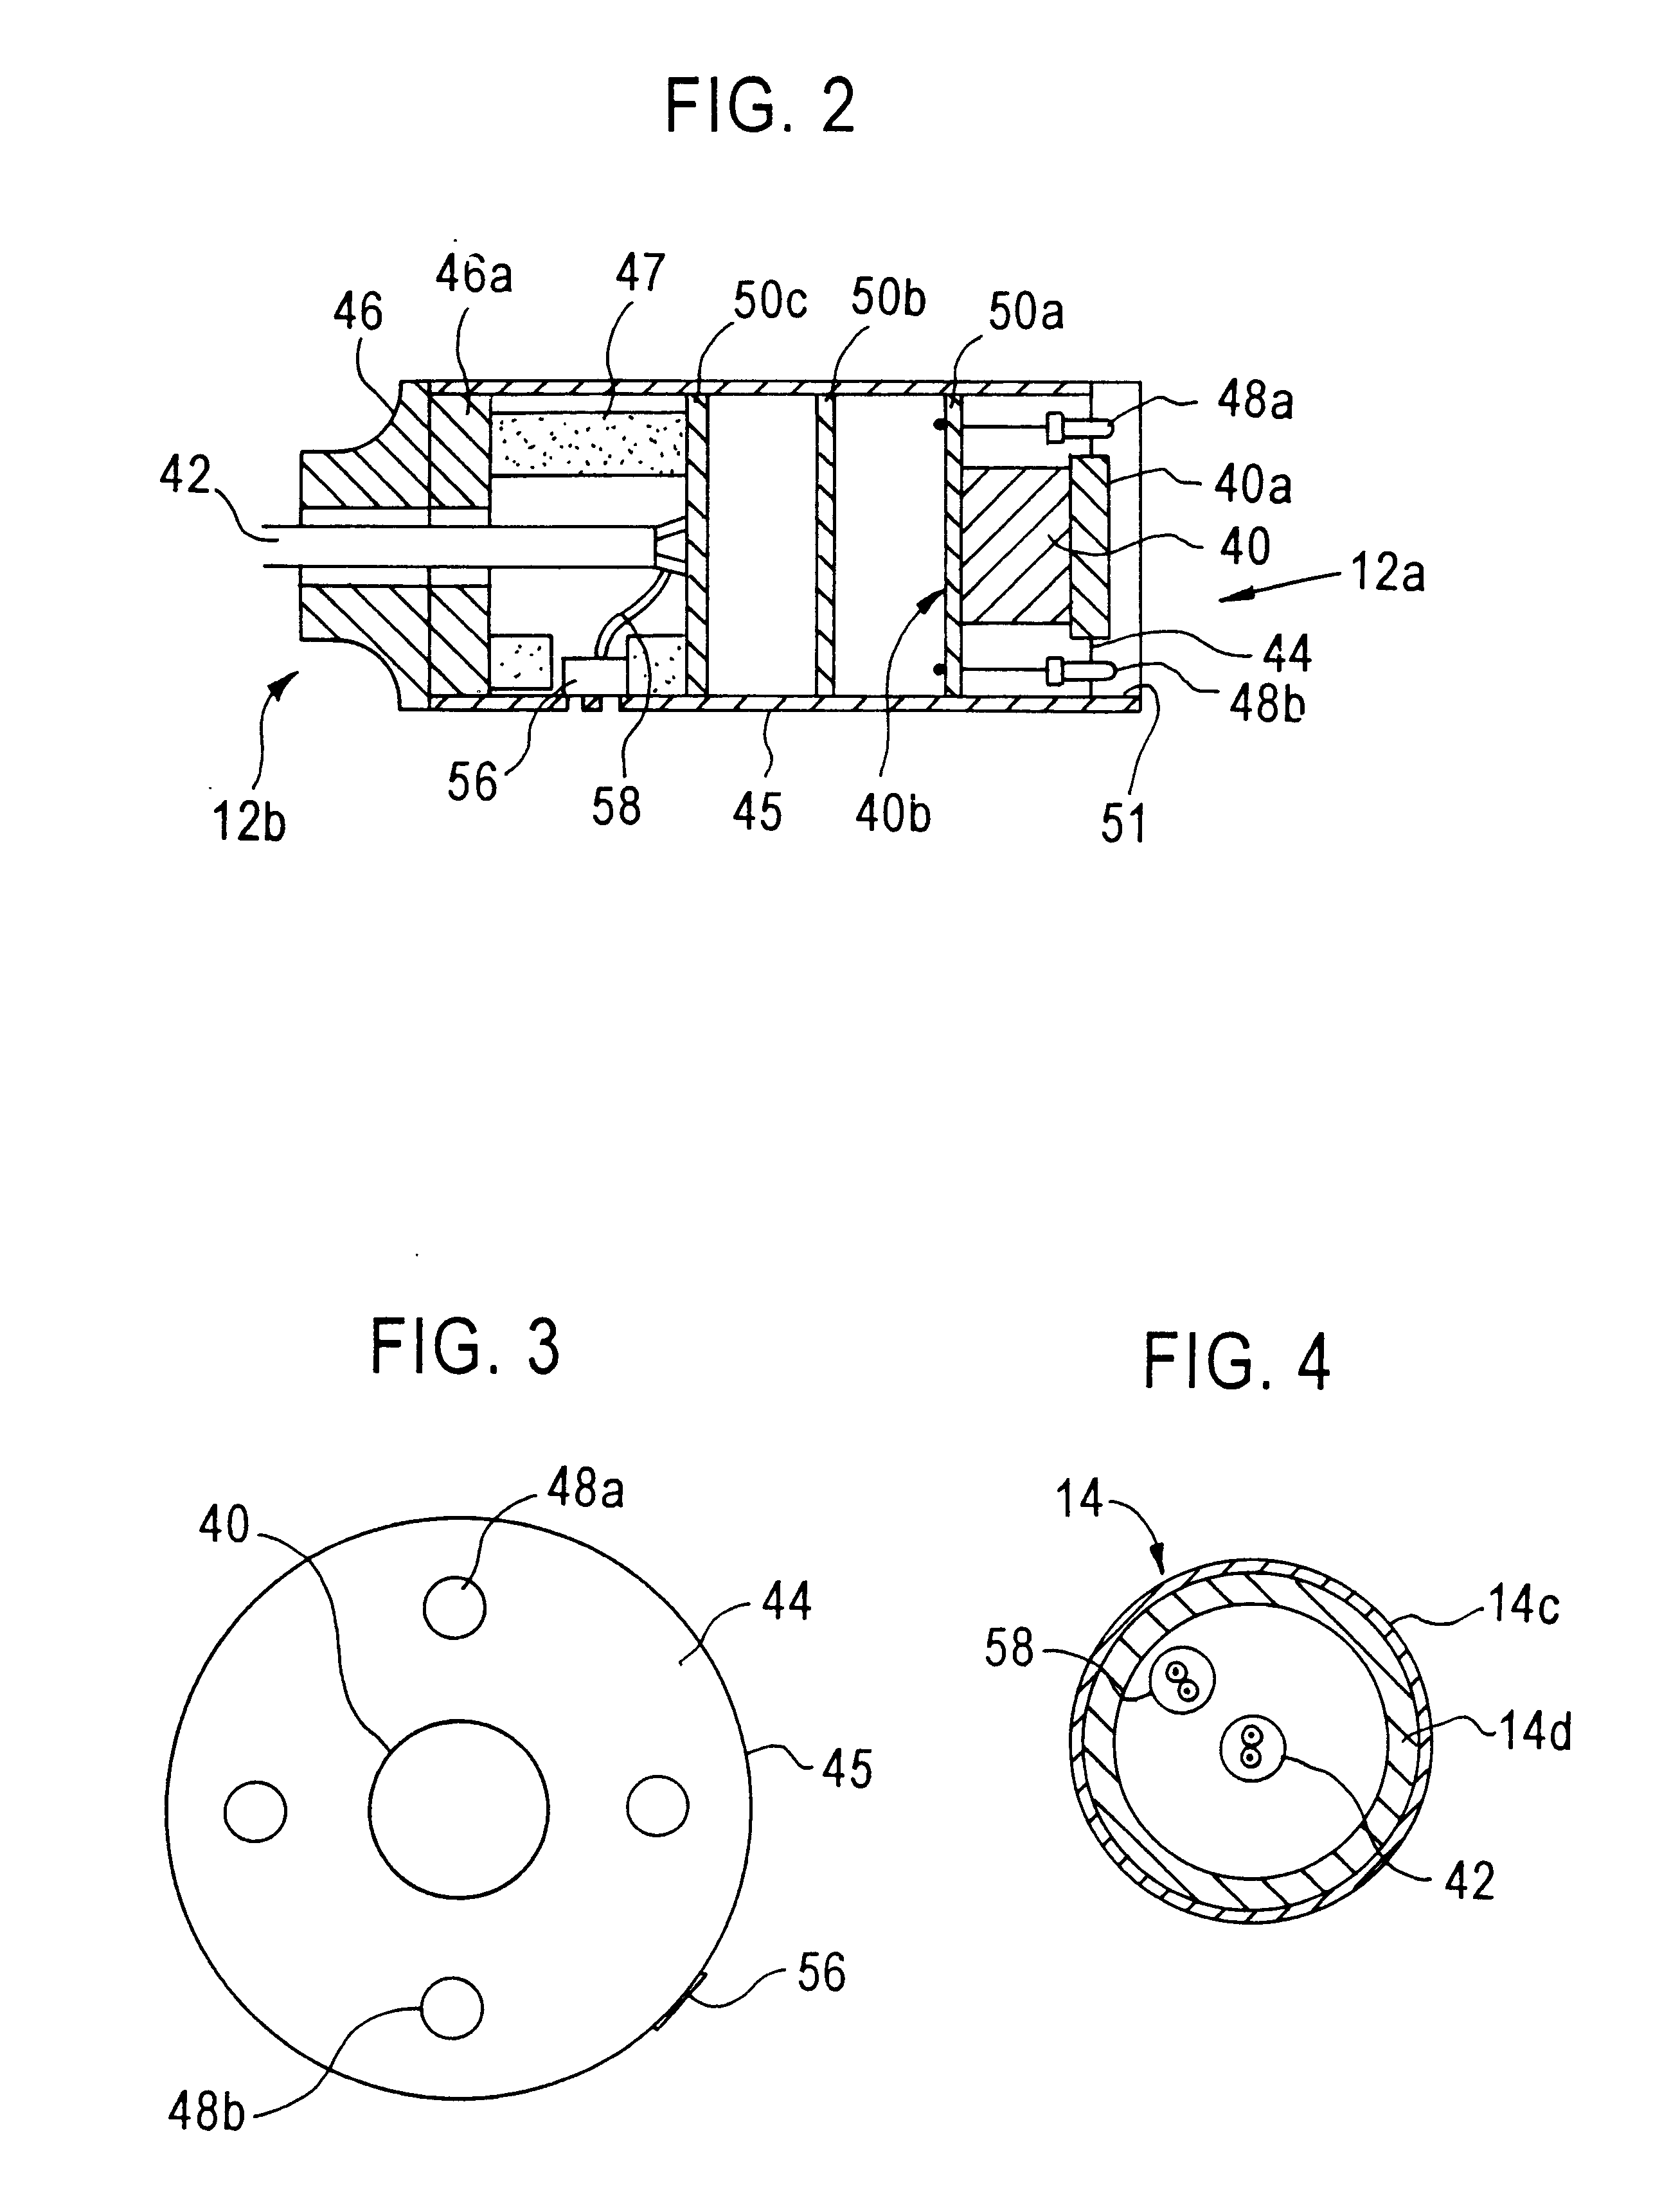 Video inspection device